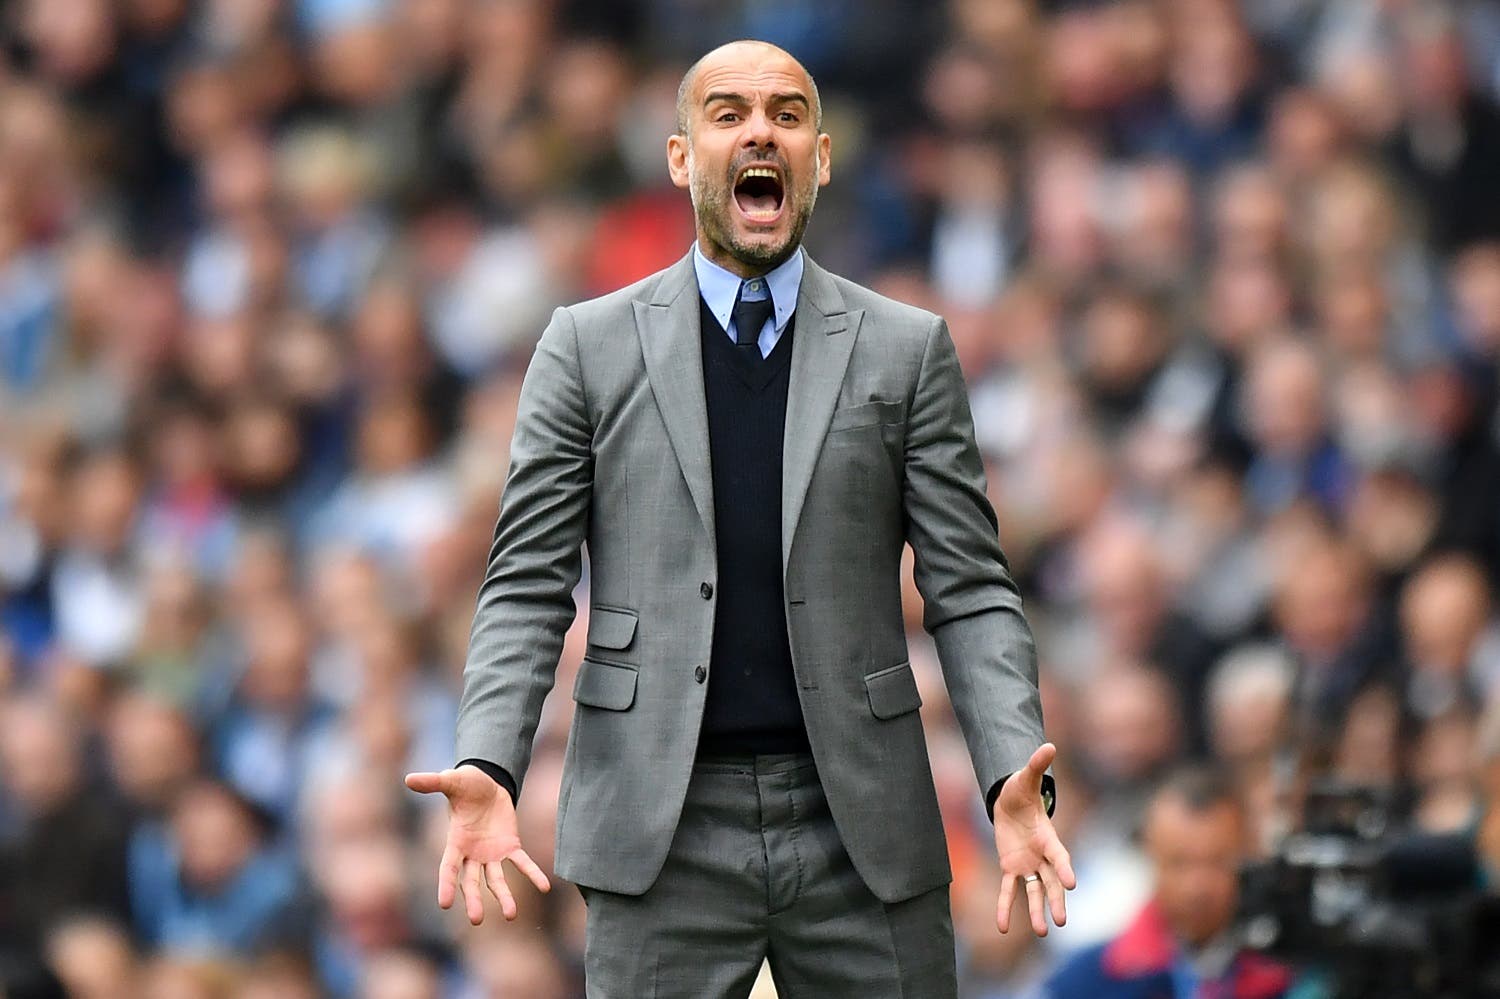 Manchester City's Spanish manager Pep Guardiola gestures on the touchline during the English Premier League football match between Manchester City and Leicester City at the Etihad Stadium in Manchester, north west England, on May 13, 2017. Manchester City won the game 2-1. (AFP)